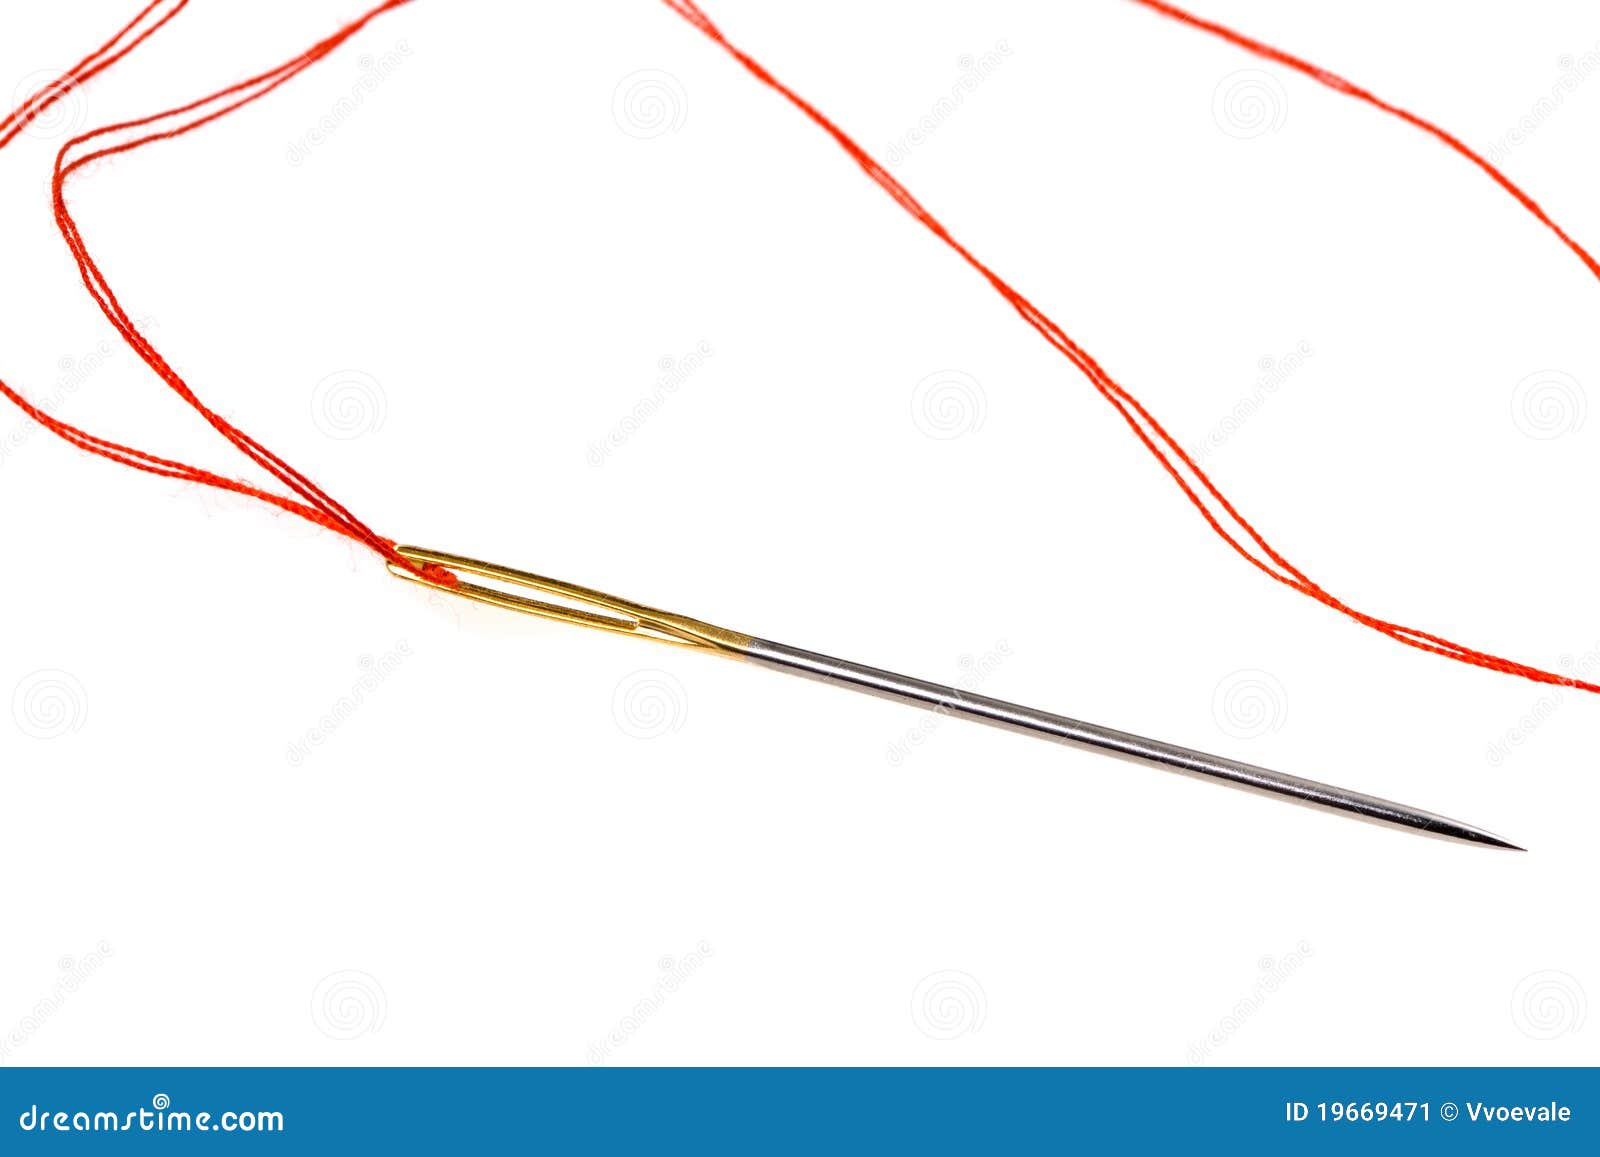 Thread a needle stock image. Image of branch, thread - 19669471